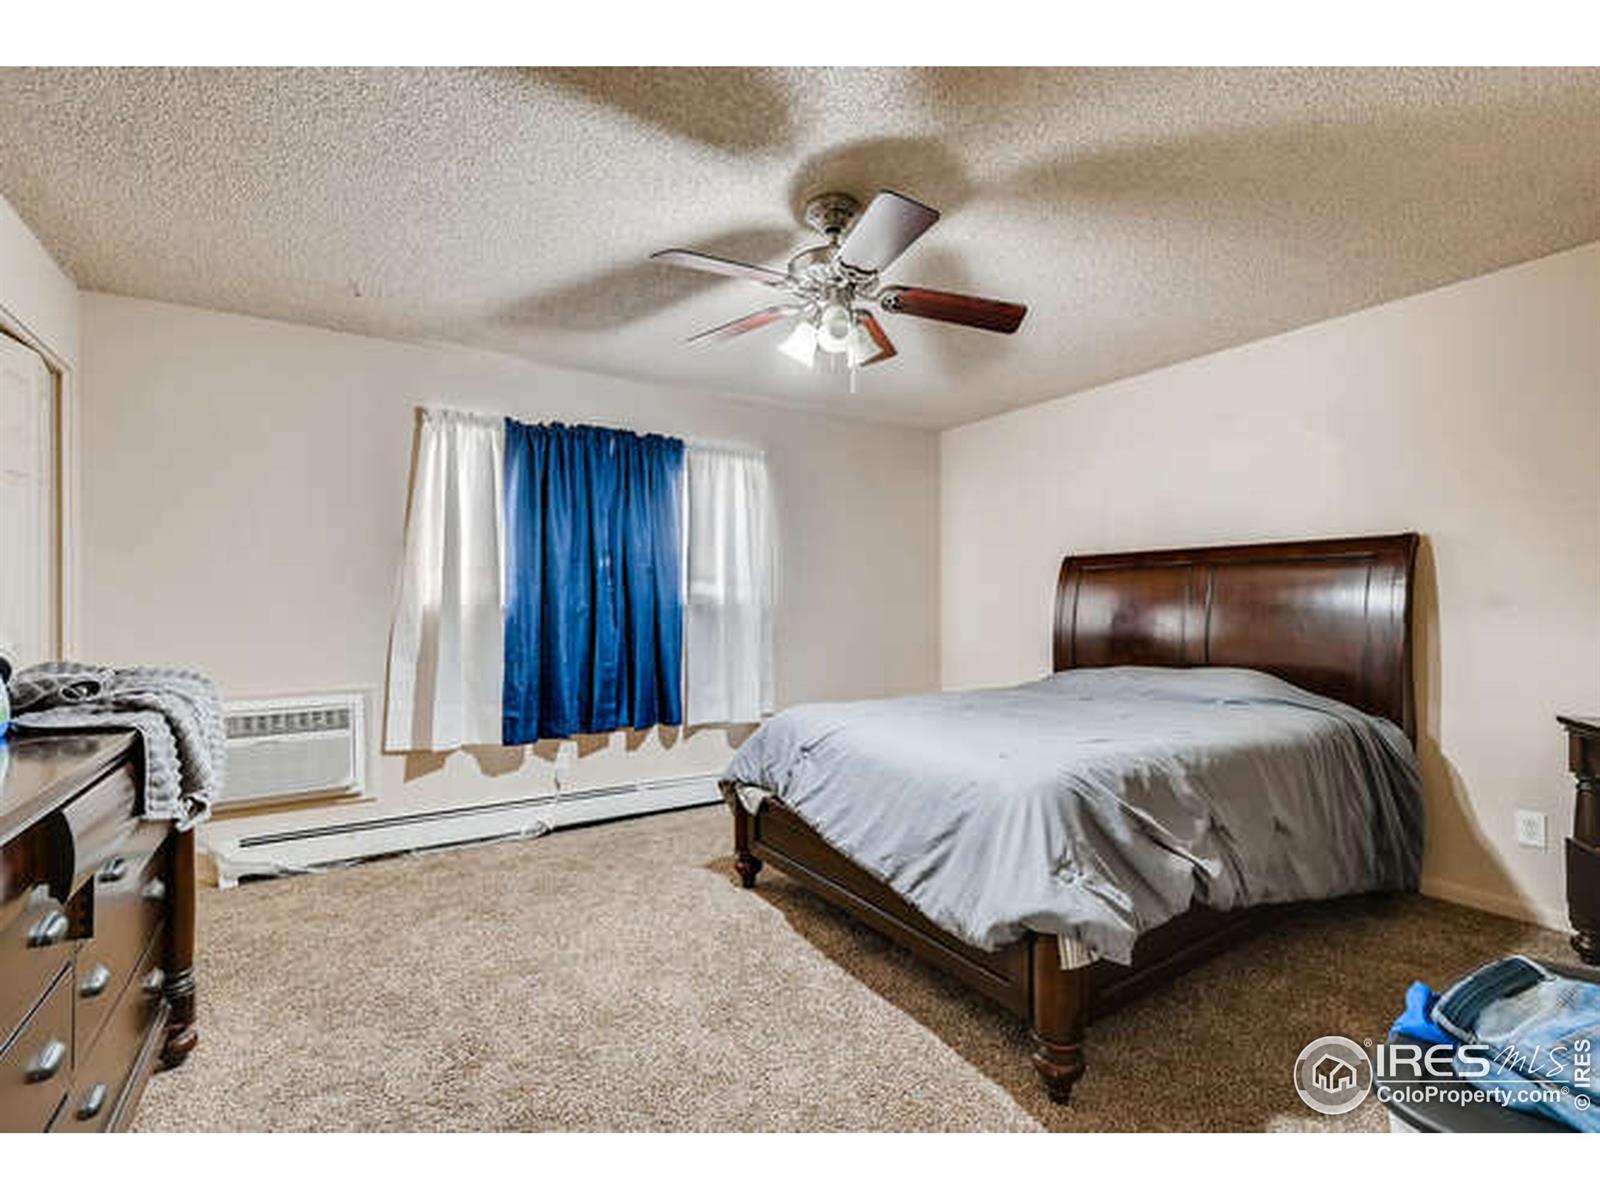 703 37th, Greeley, CO